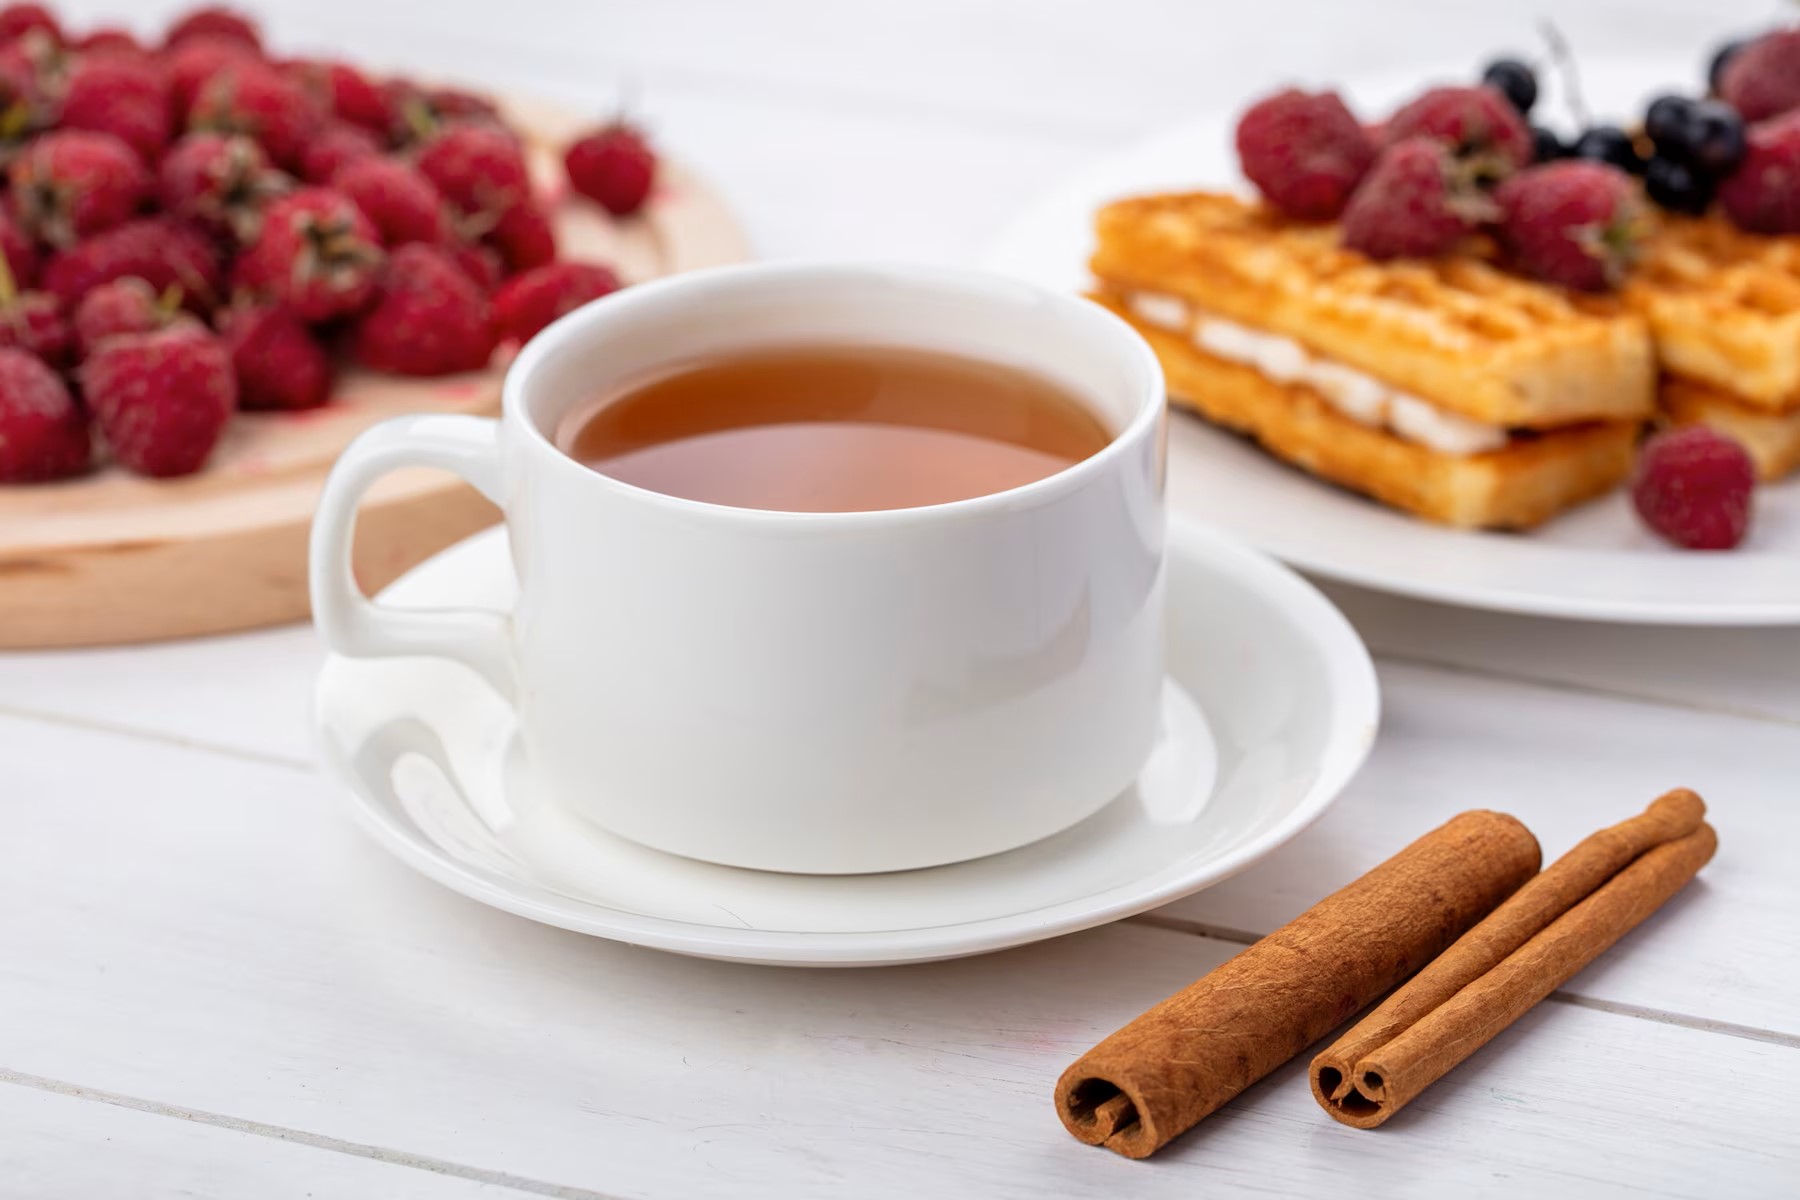 side-view-of-cup-of-tea-with-cinnamon-white-cherries-and-sweet-waffles-with-raspberries-on-a-white-surface_141793-17924.jpg